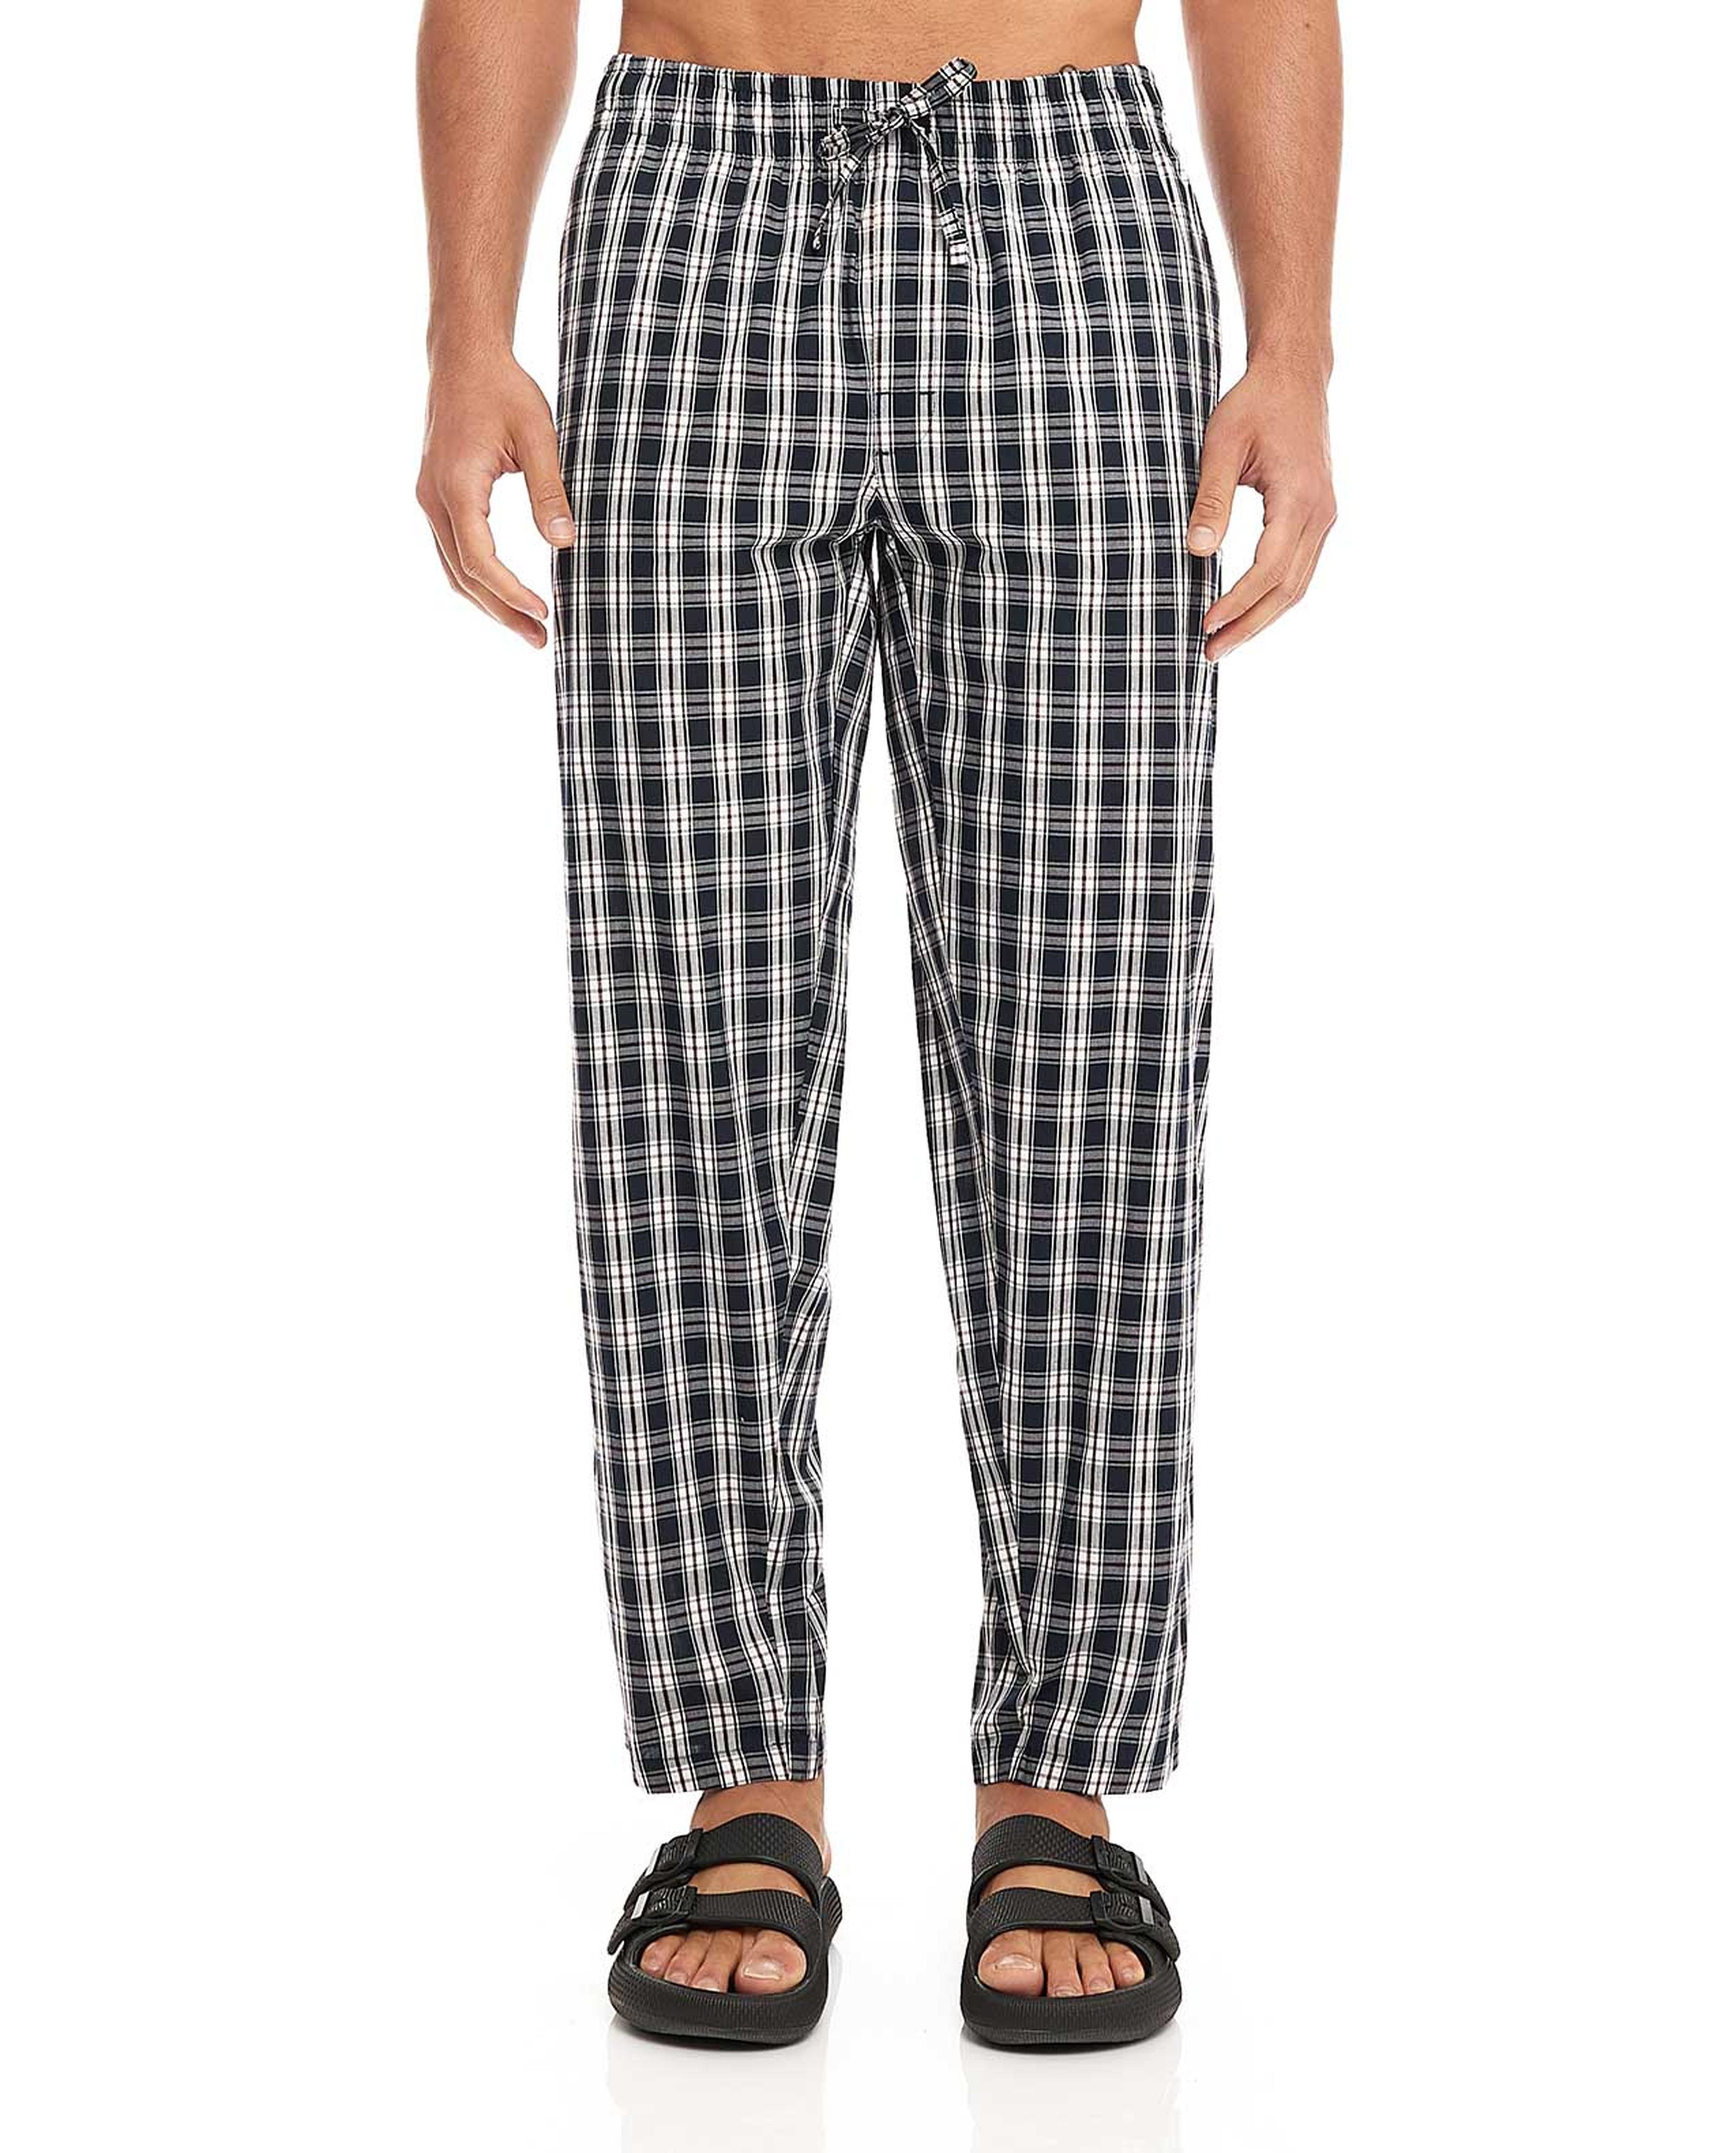 Checked Lounge Pants with Drawstring Waist